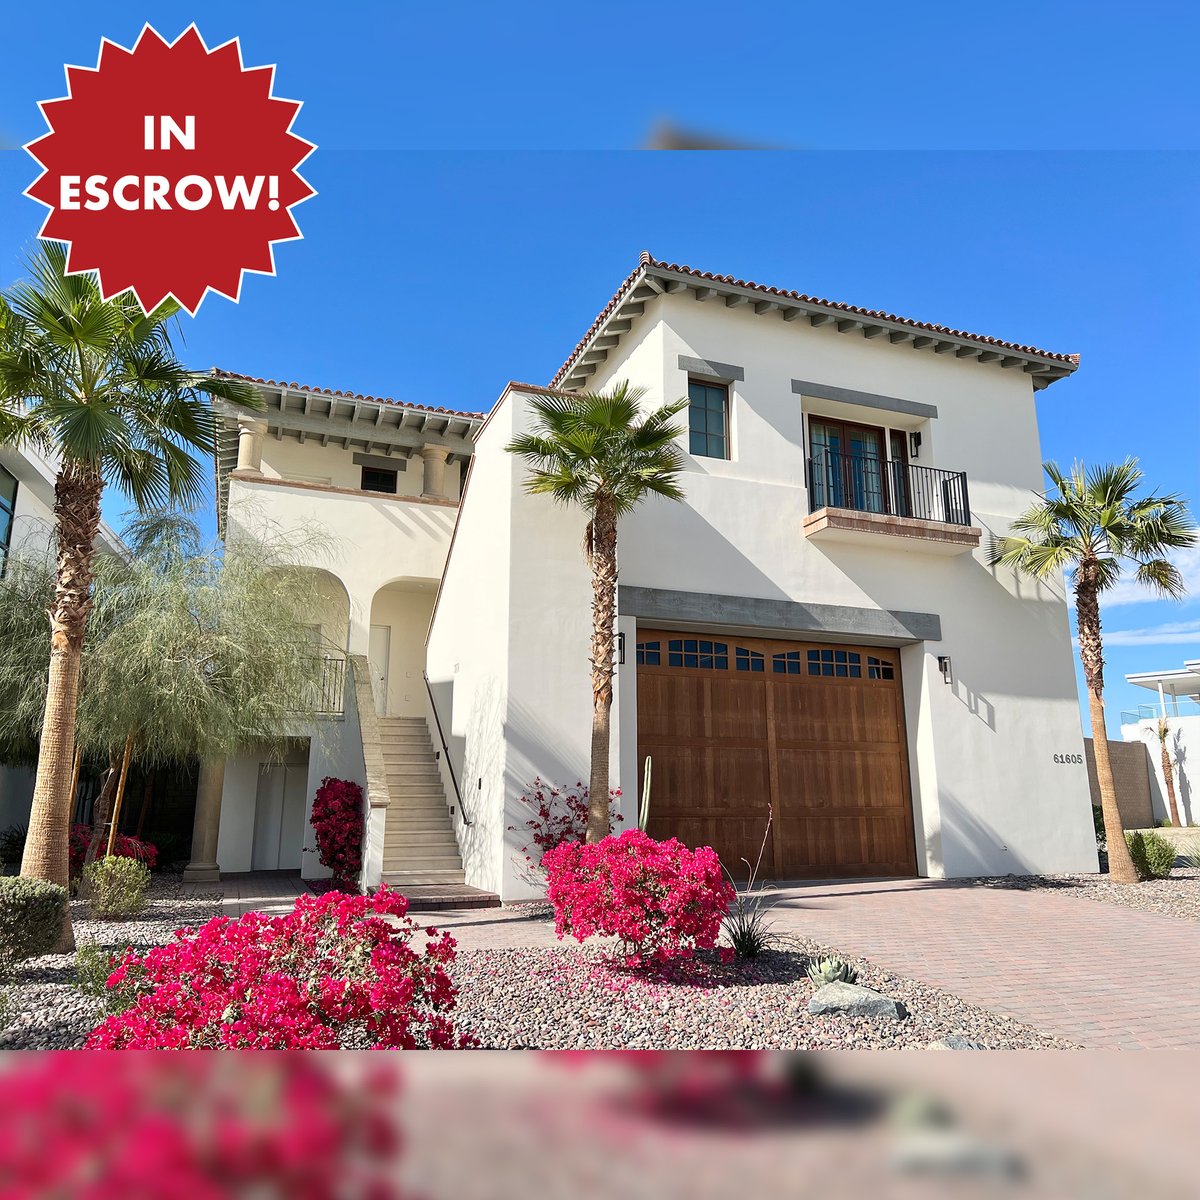 In Escrow! 8,561 SF Modern Luxury Villa in Thermal!

Listed by:

Susan Harvey
Emily Harvey

#coachellavalley #coachellavalleyrealestate #larealestate #forsale #homesforsale #losangelesrealestate #luxuryrealestate #realestate #realtor #realestateagent #property #Thermal